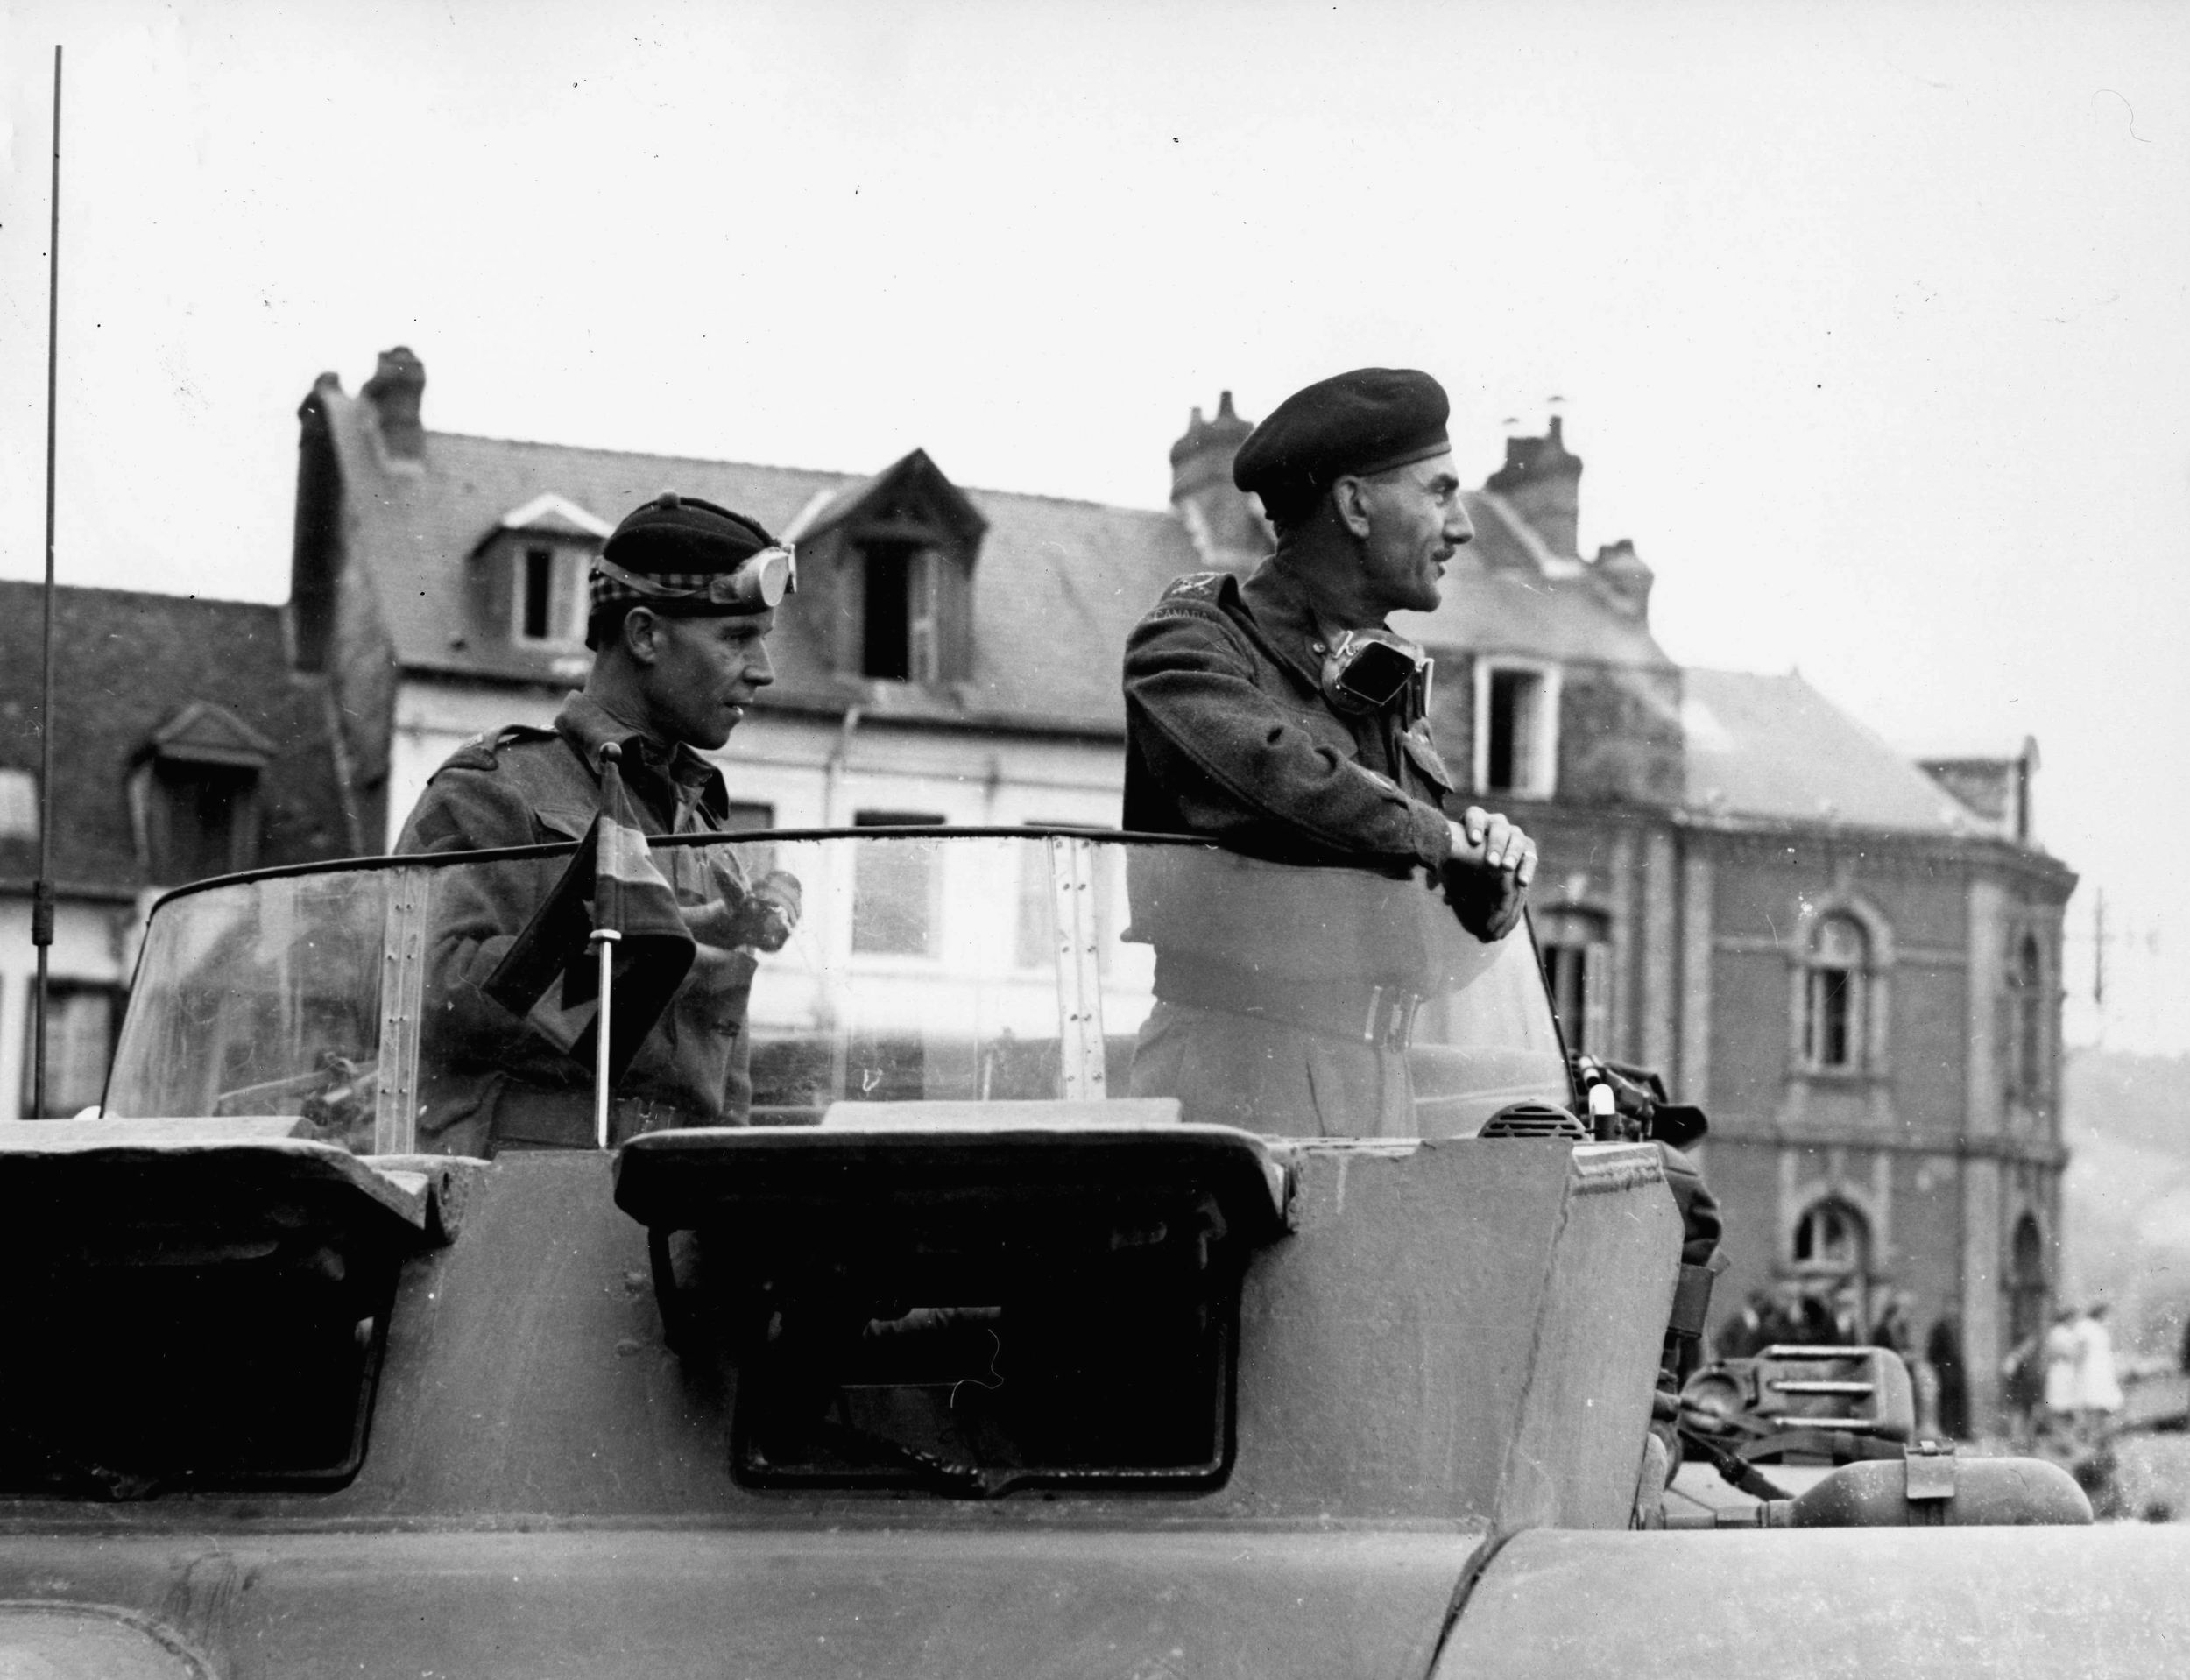 Lieutenant General Guy Simonds watches closely as the first tank of his Canadian II Corps crosses the River Seine in France. The II Corps also included the Polish 1st Armored Division.